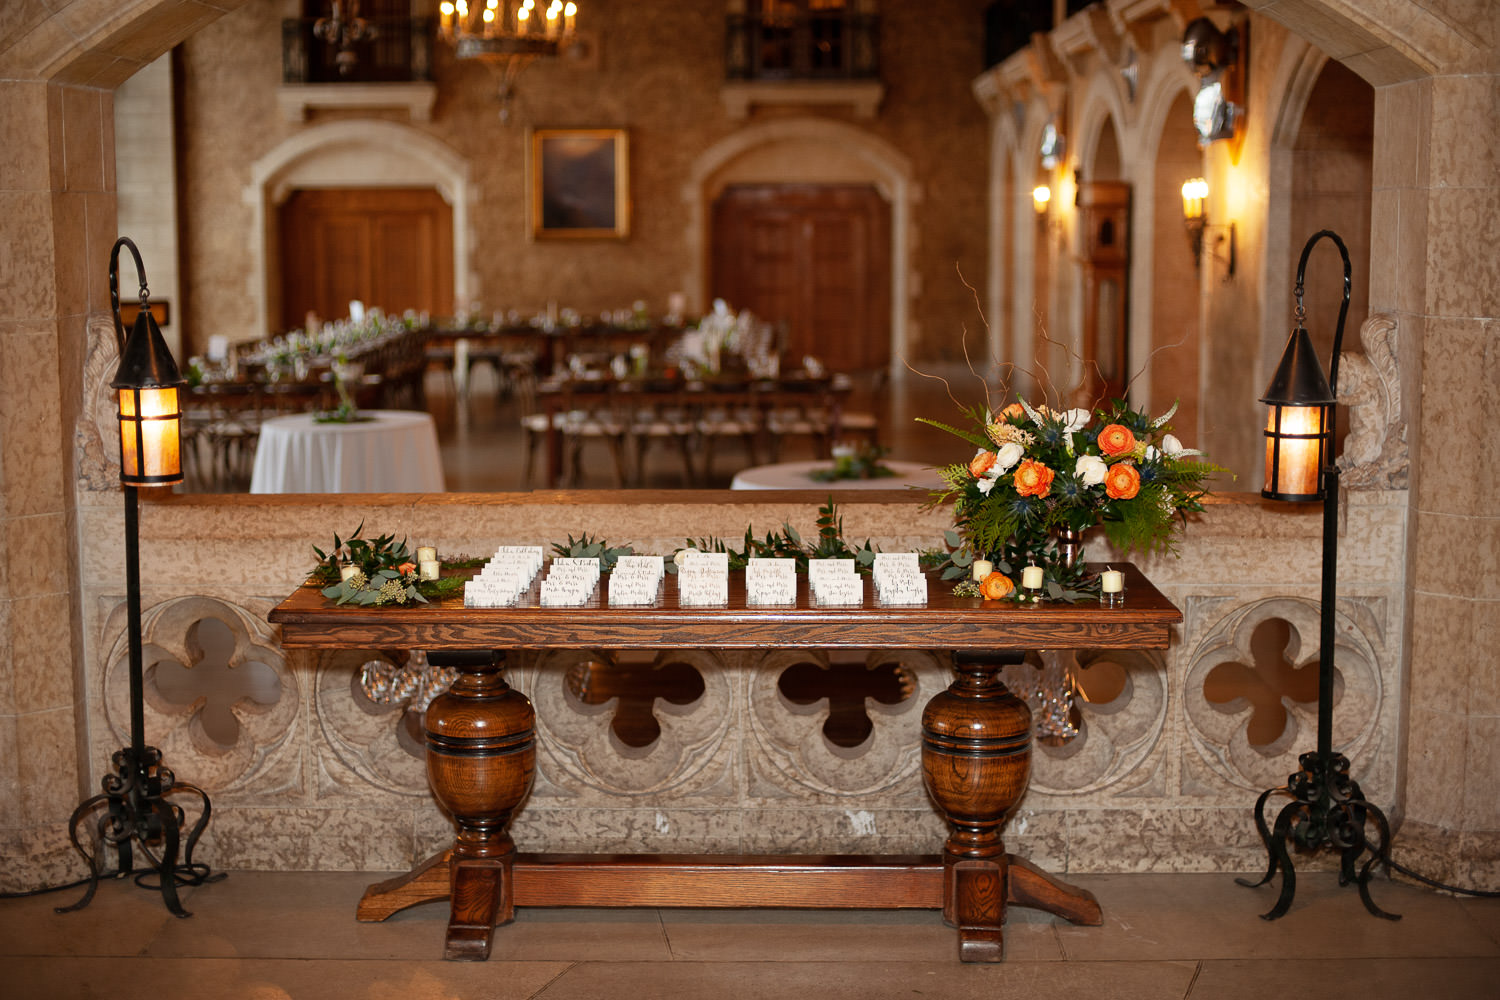 Placecard table in Mt. Stephen Hall at the Fairmont Banff Springs captured by Tara Whittaker Photography